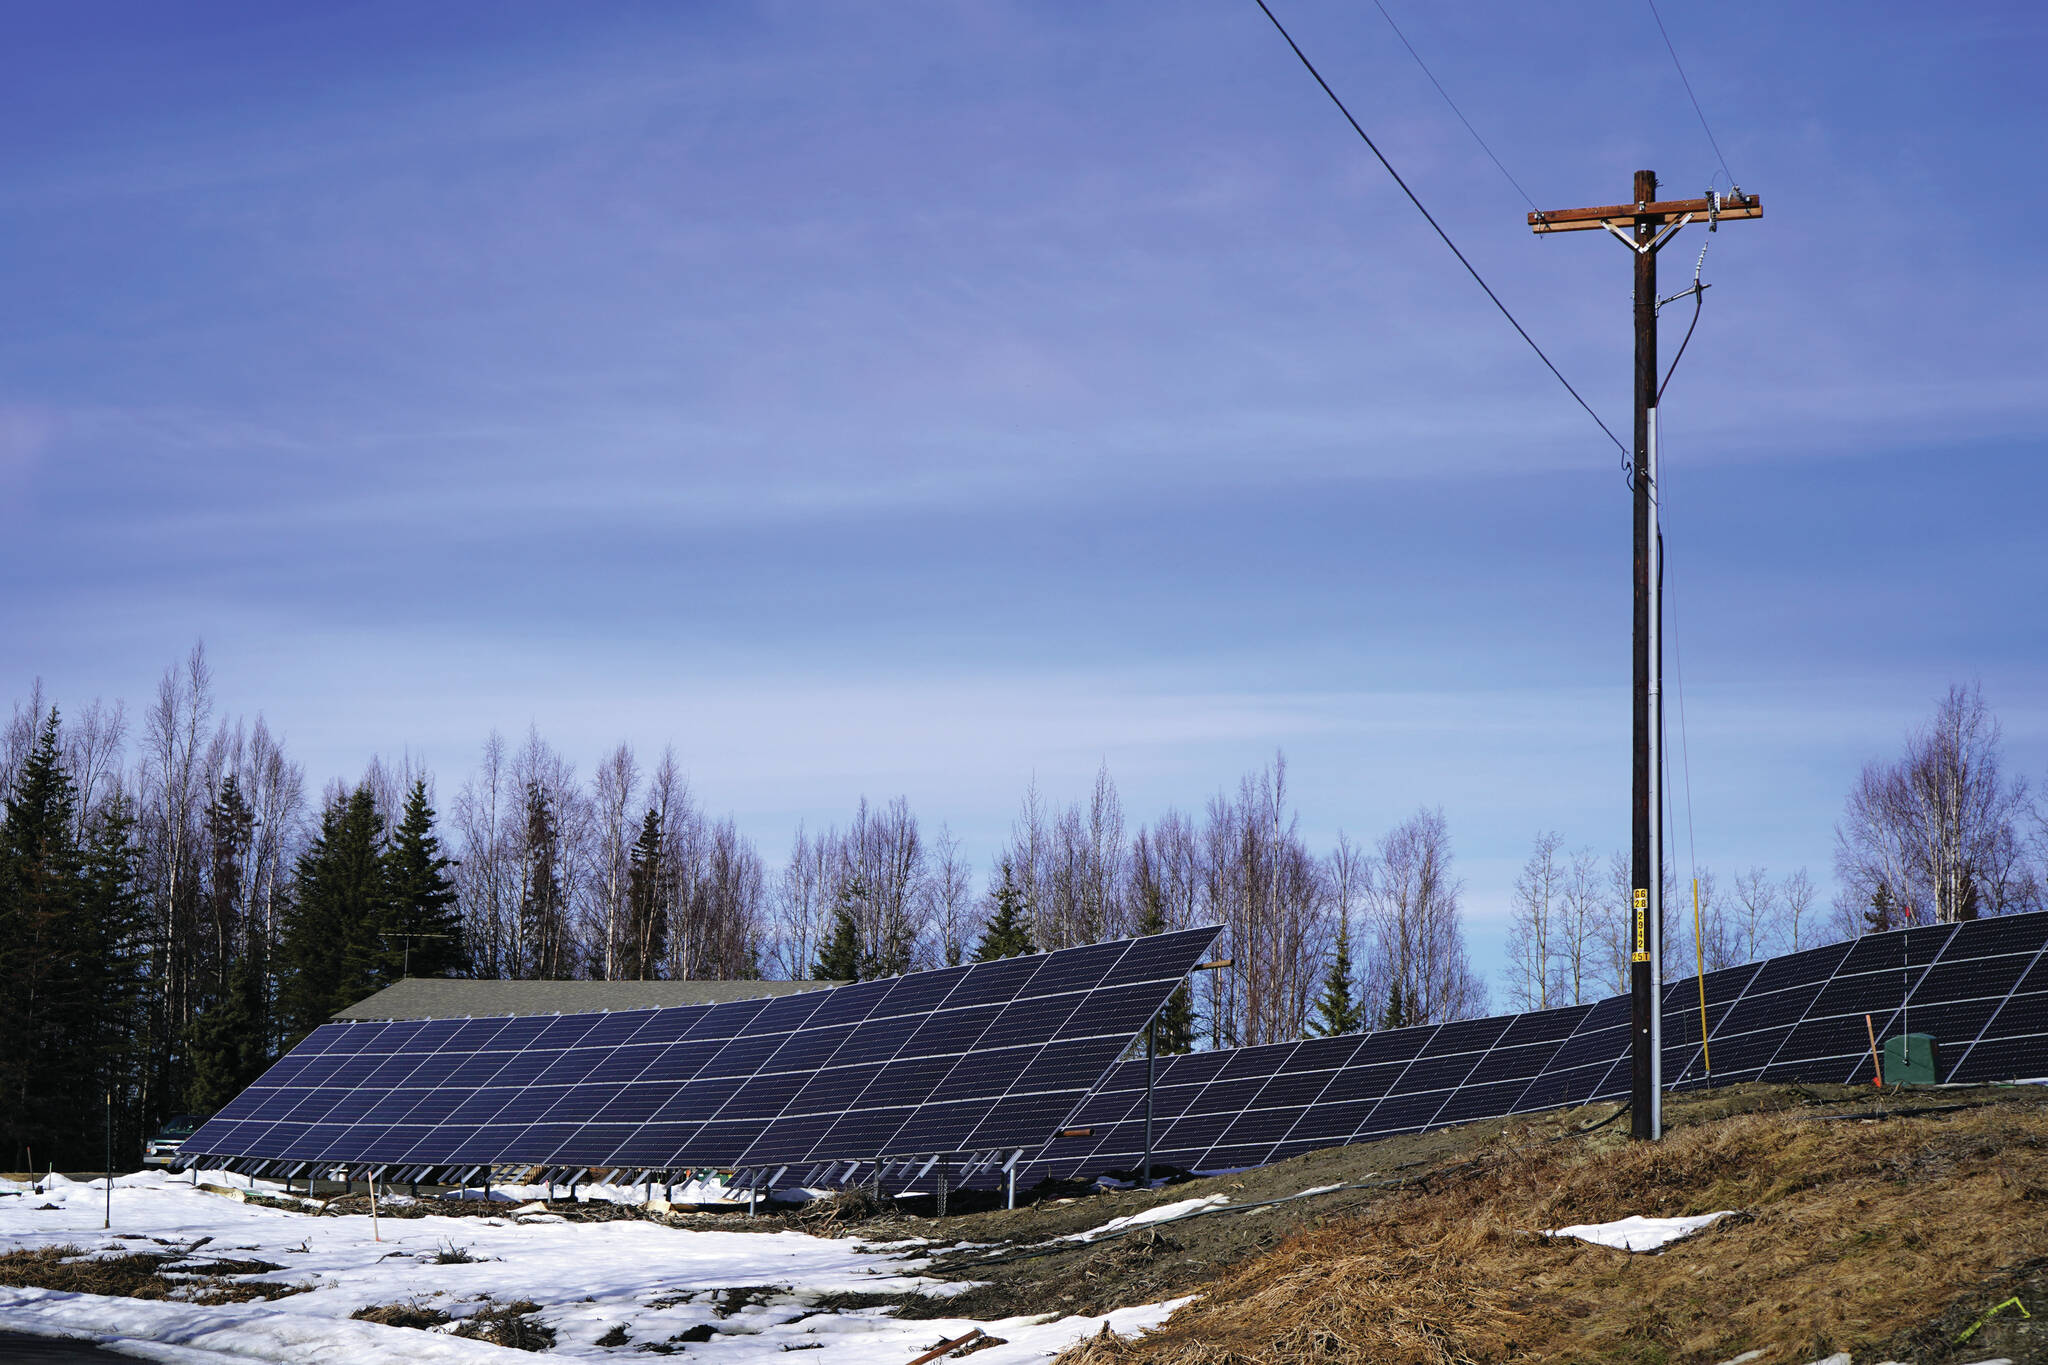 Jake Dye/Peninsula Clarion
An array of solar panels stand in the sunlight at Whistle Hill in Soldotna on Sunday.